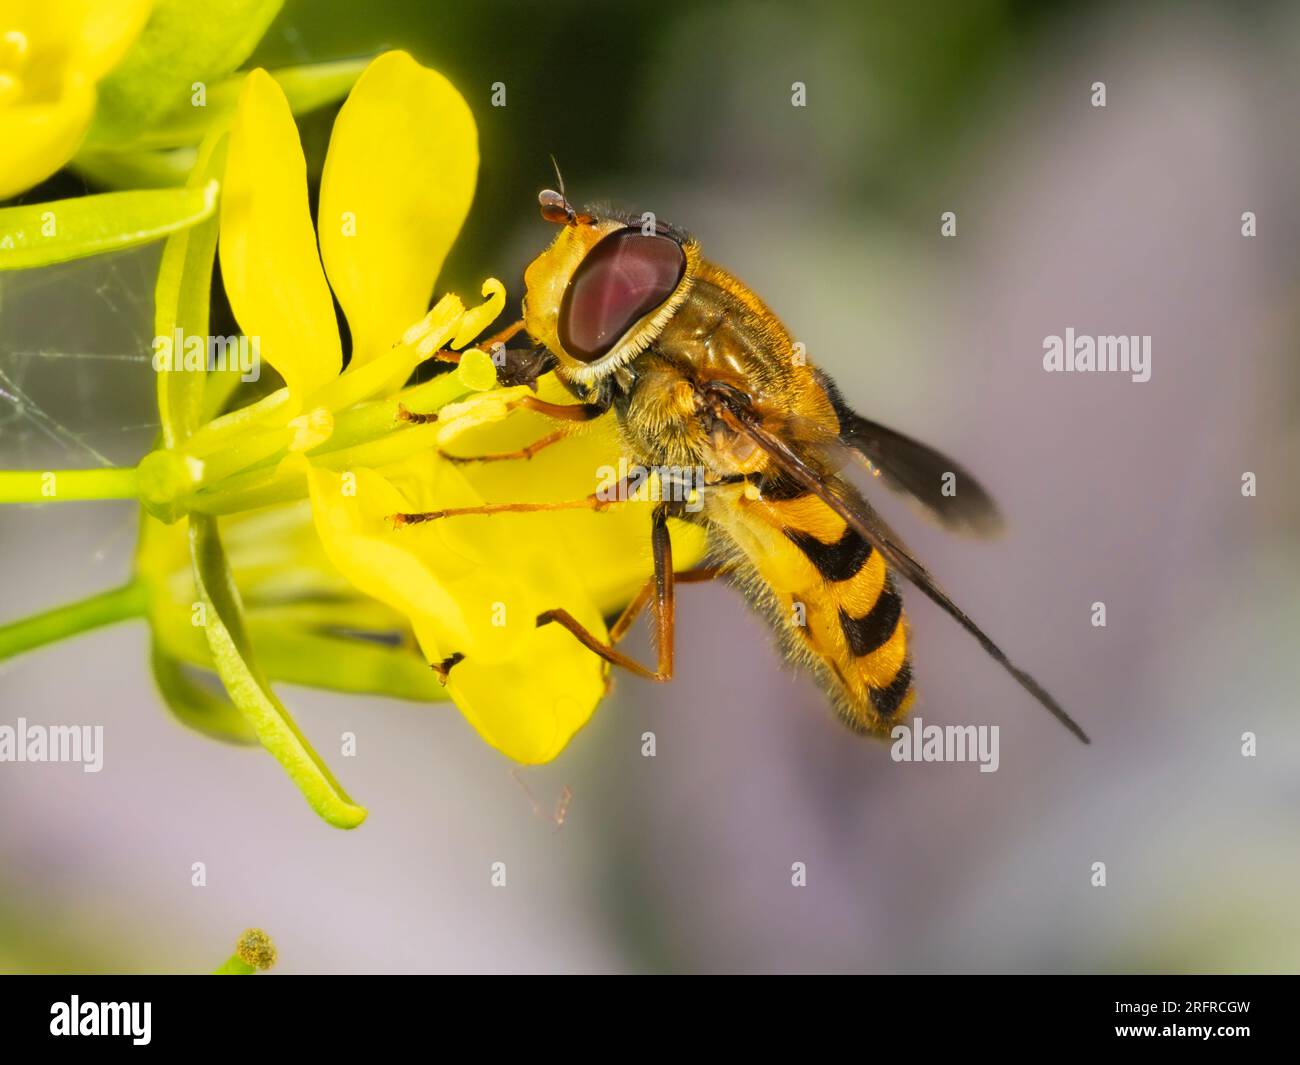 Side view of the UK hoverfly Syrphus ribesii feeding on a flower of mustard Stock Photo